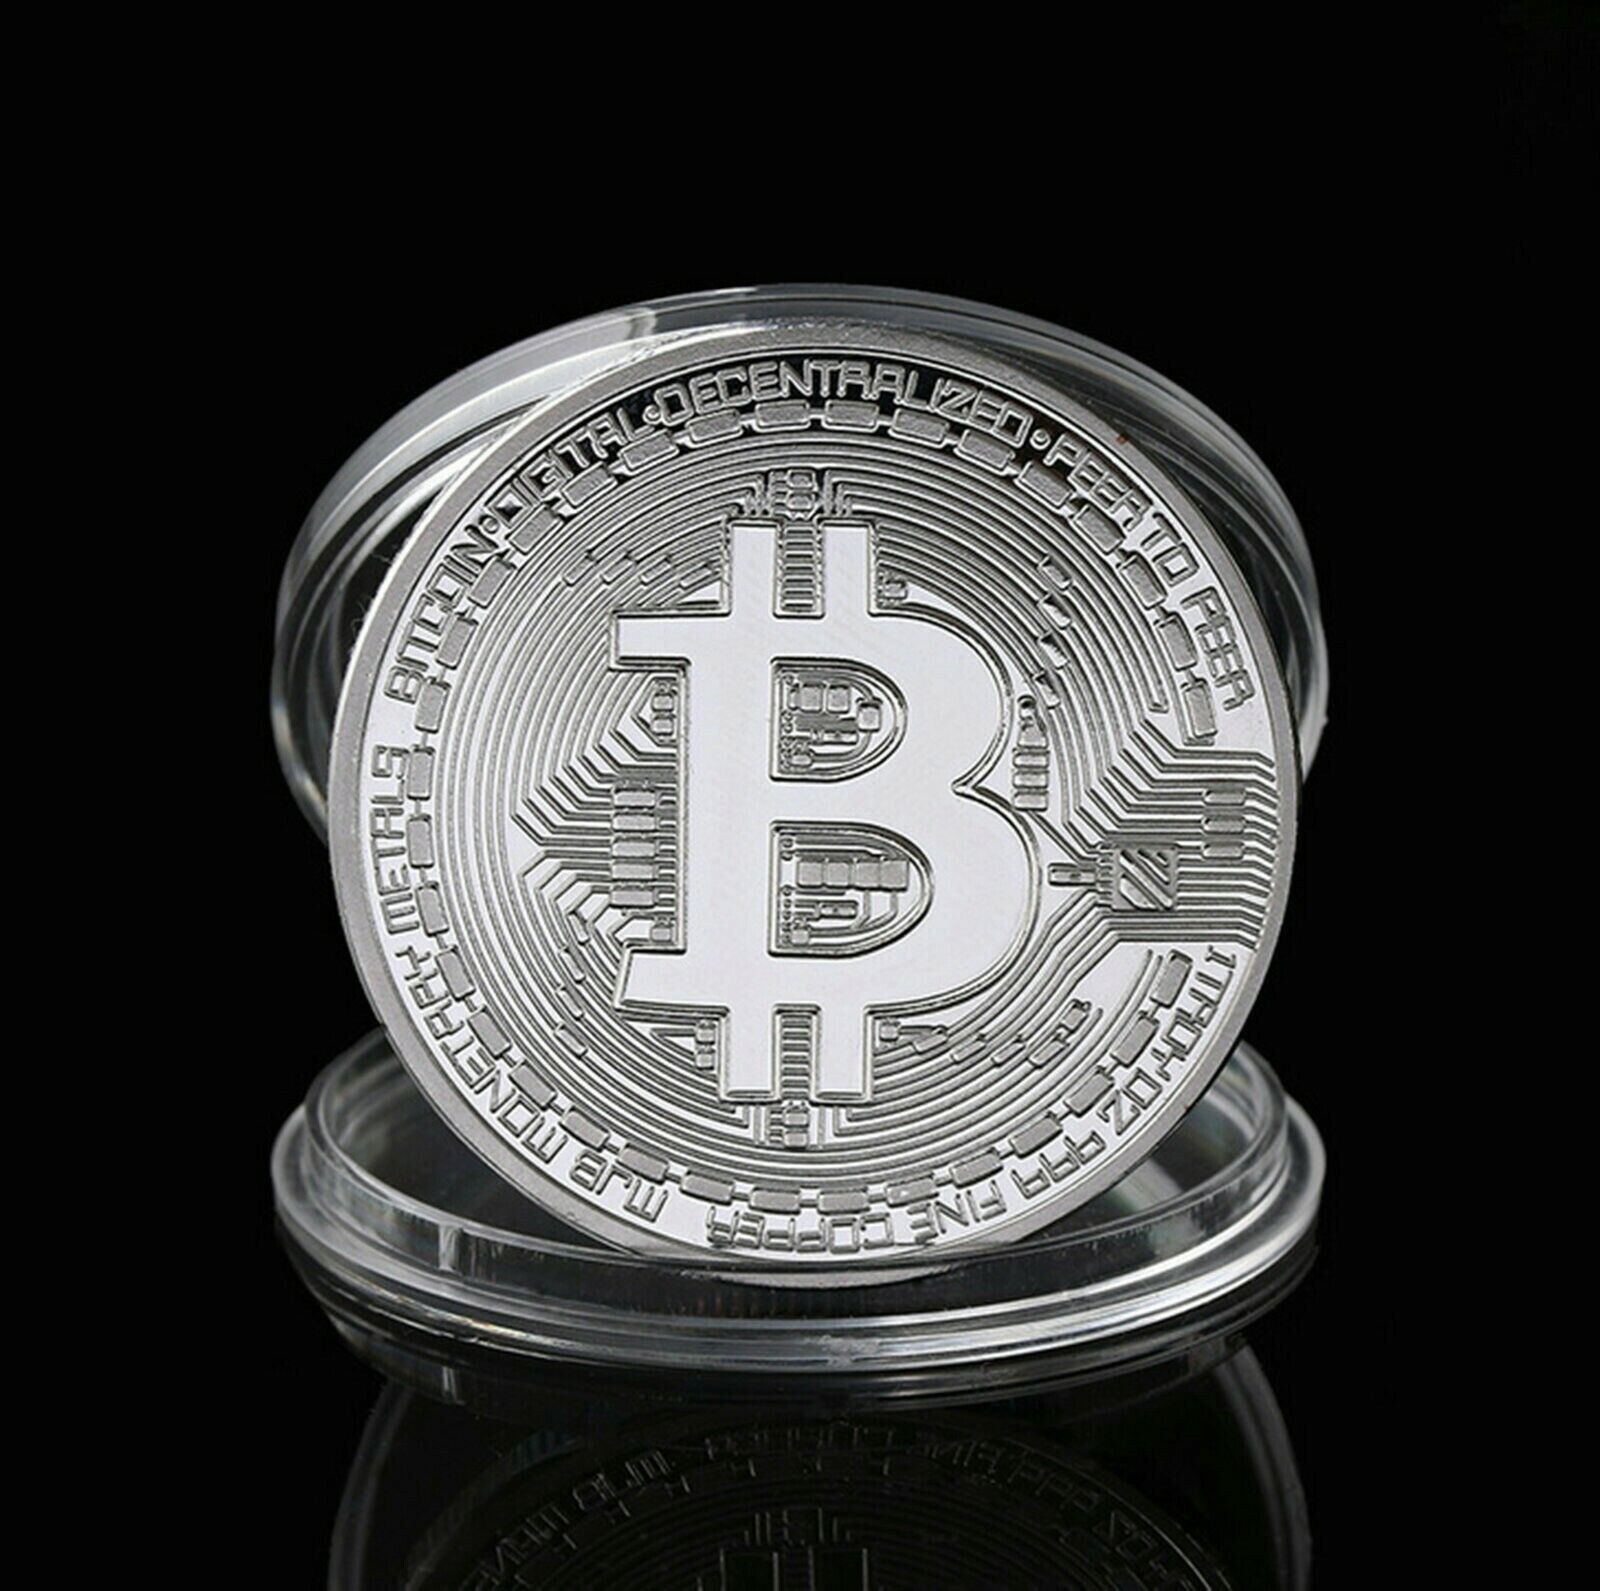 9Pcs Silver Bitcoin Coins Commemorative New Collectors Gold Plated Bit Coin US Без бренда - фотография #3